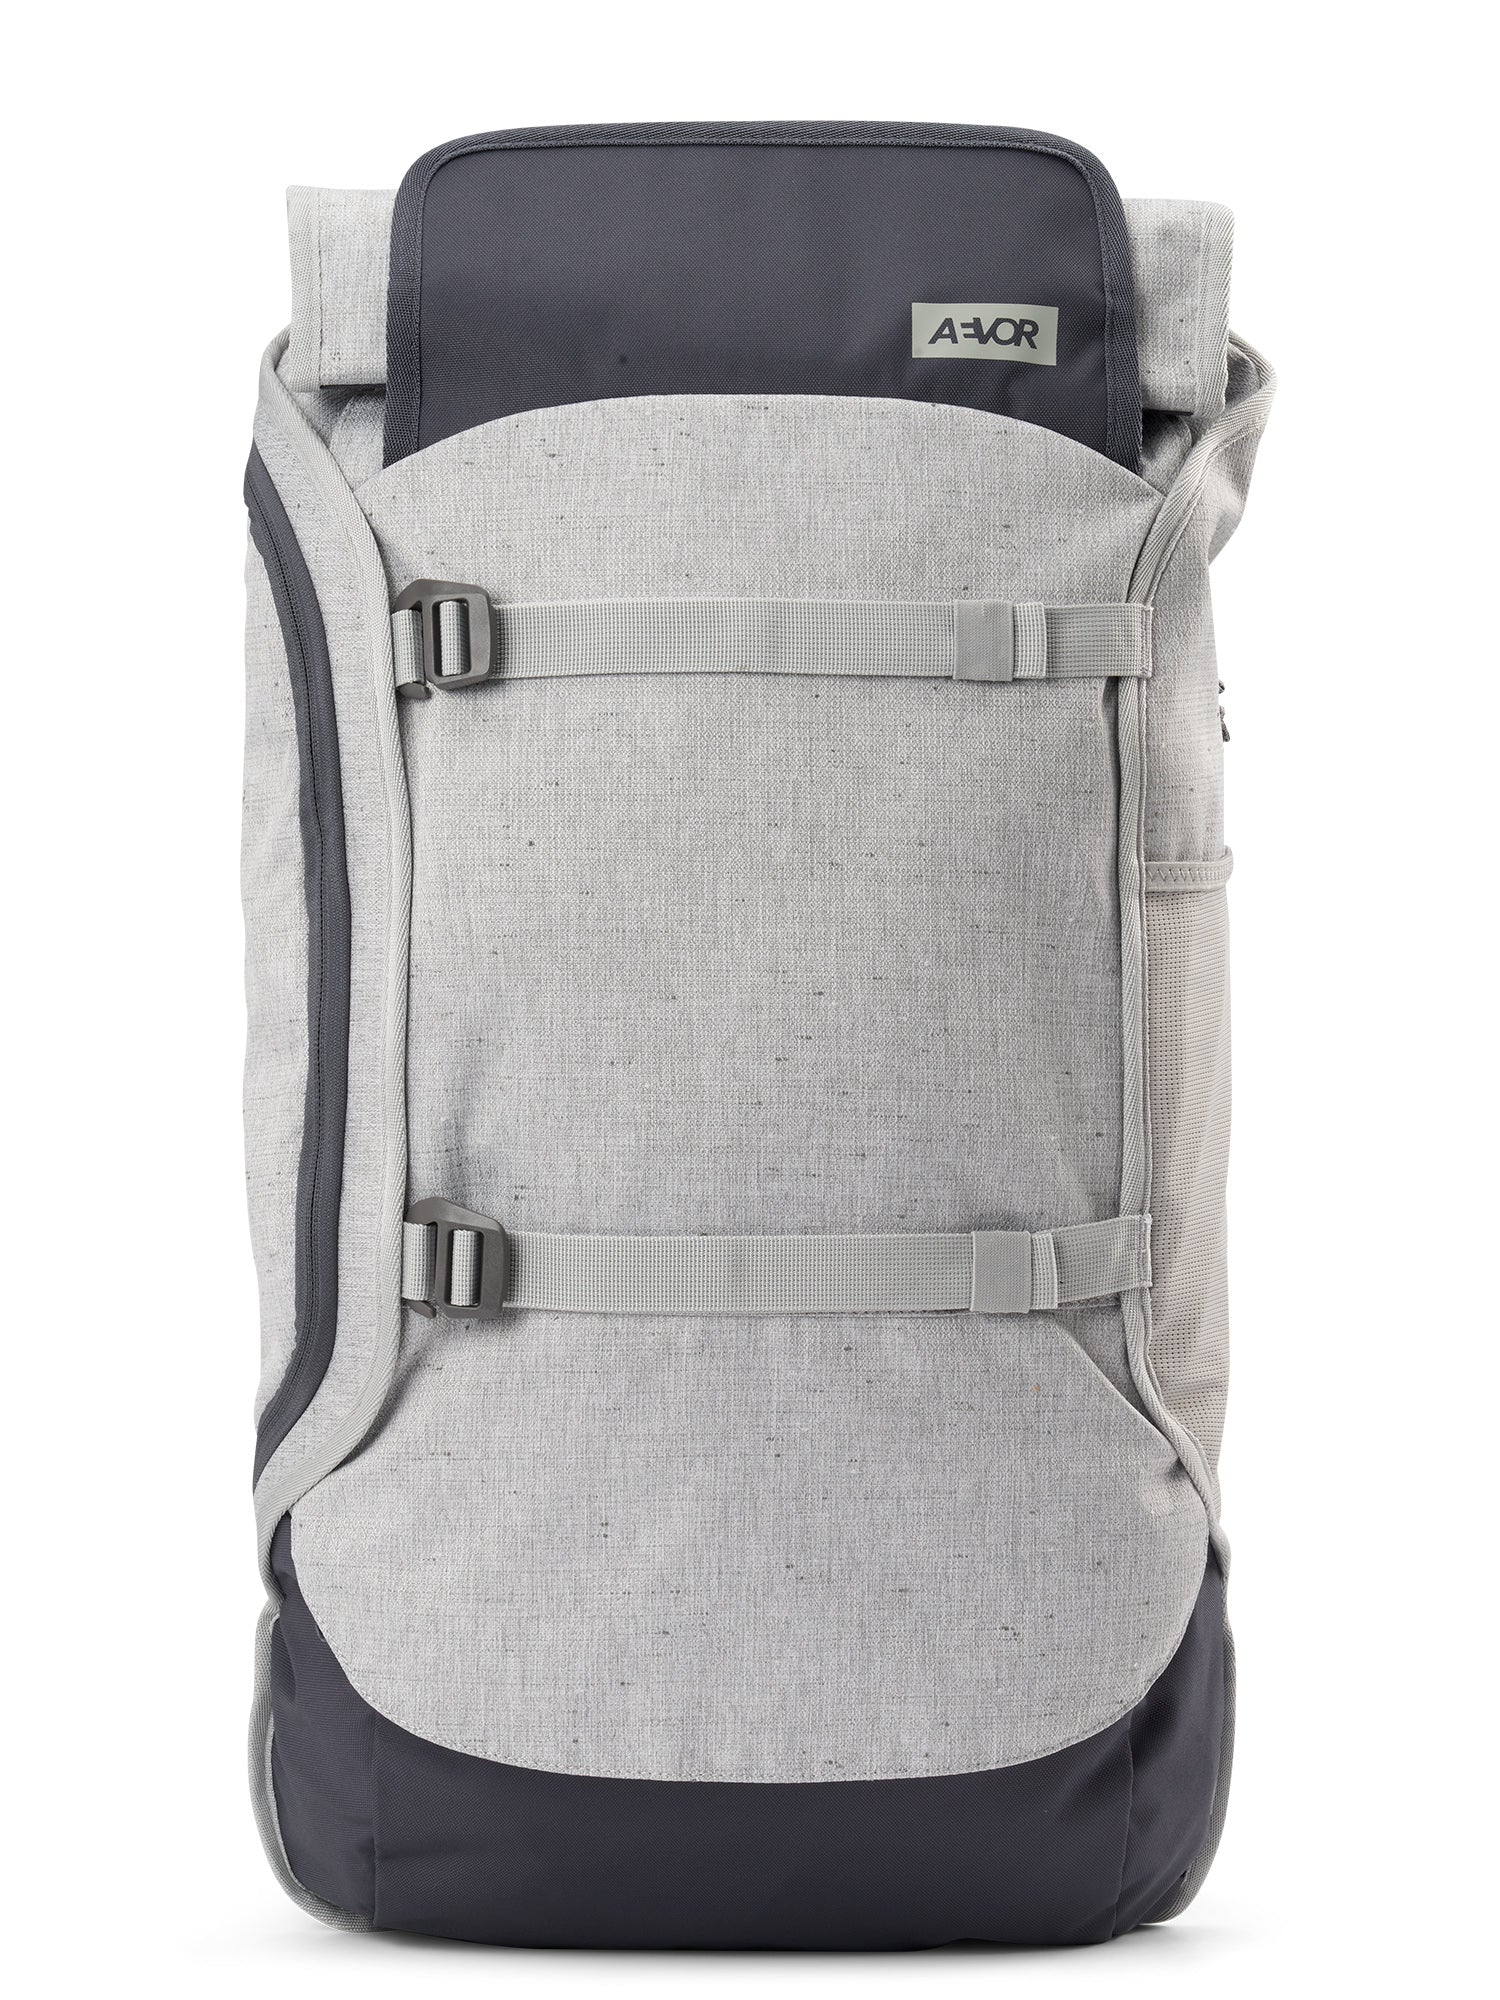 TRAVEL PACK - Modern Urban Design with Hiking Backpack Functions